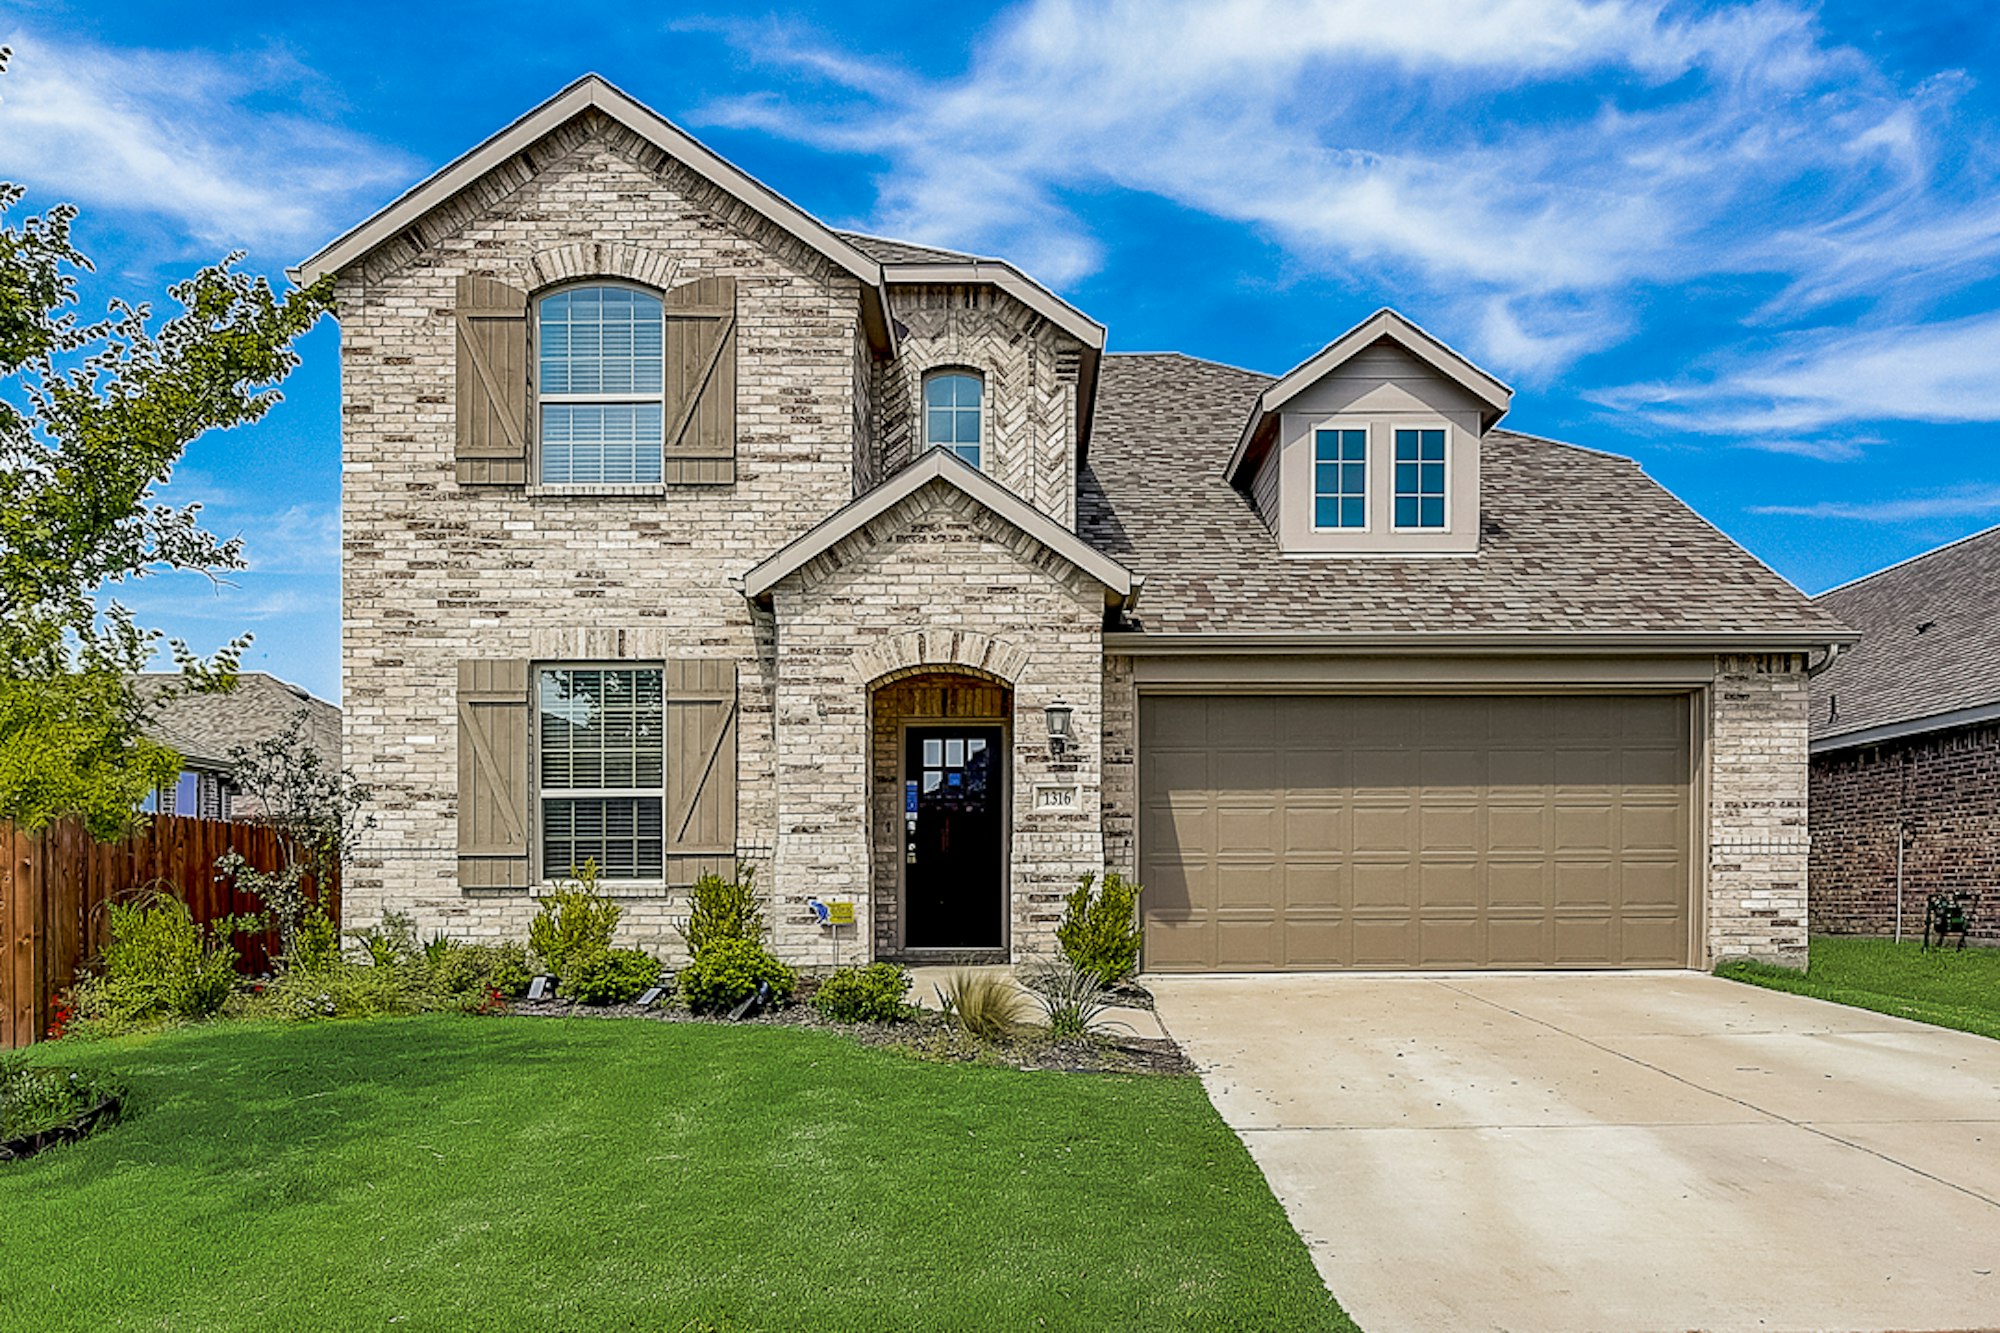 Photo 1 of 42 - 1316 Carlsbad Dr, Forney, TX 75126